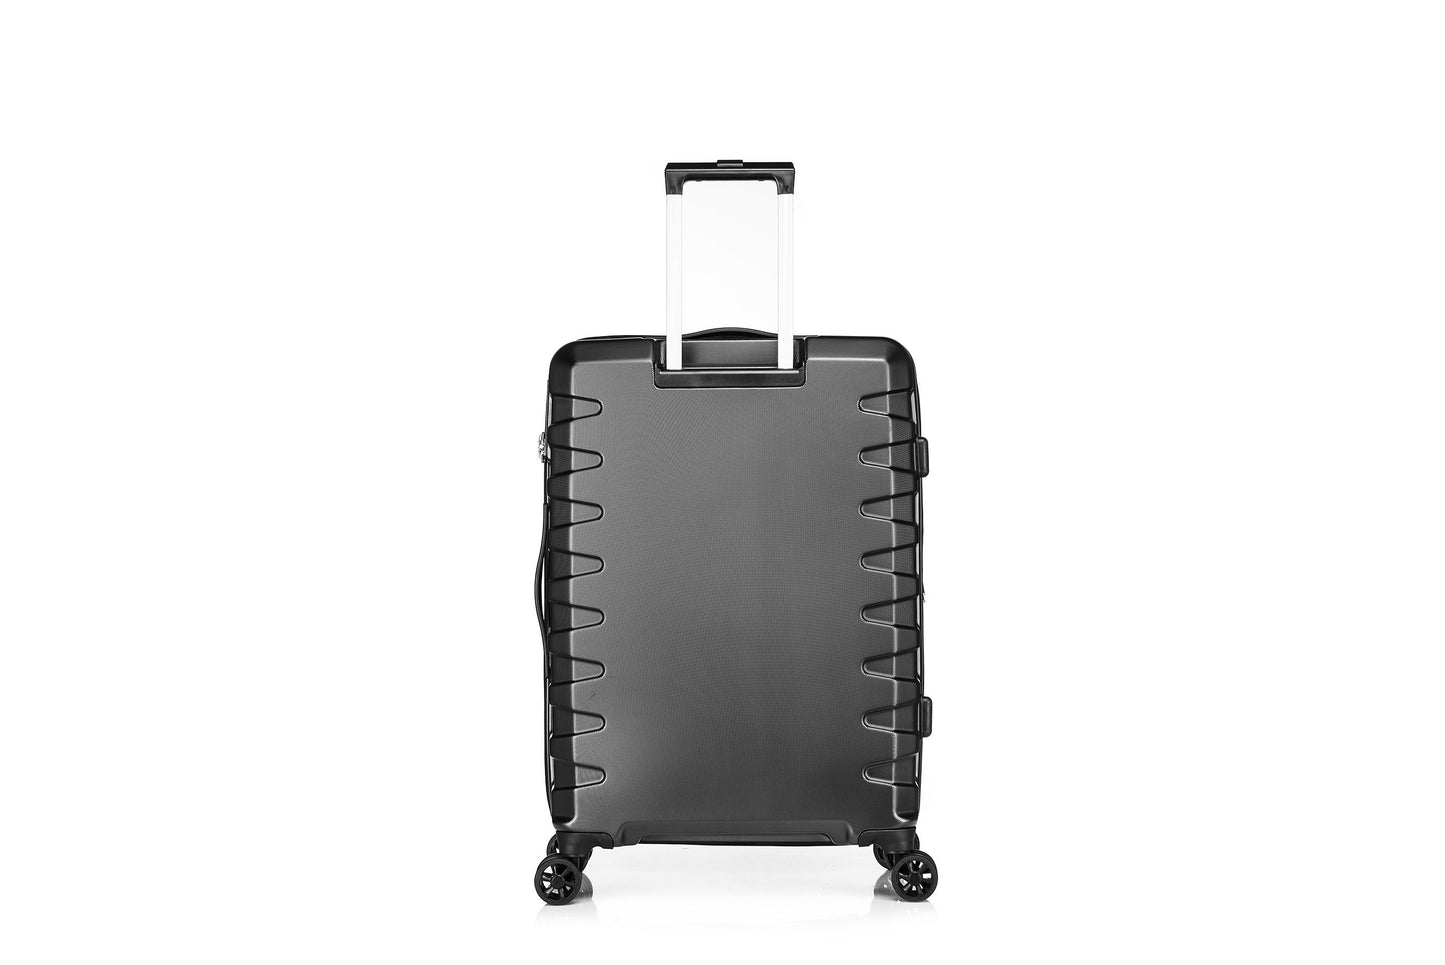 Crust Suitcase by  Adelphi.